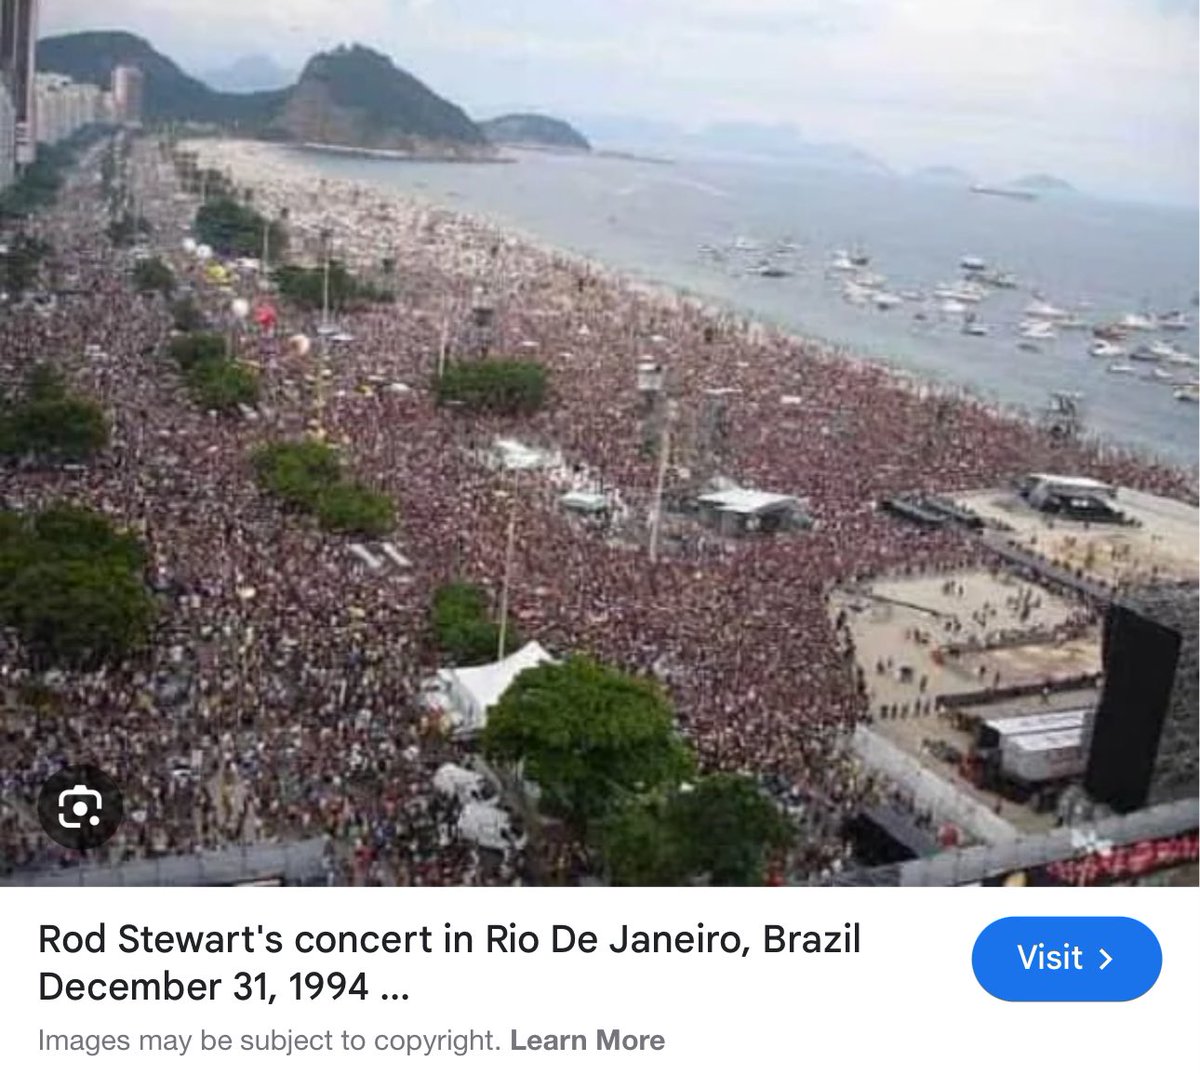 This is a 1994 Rod Stewart concert in Brazil. The mountains kinda give it away.